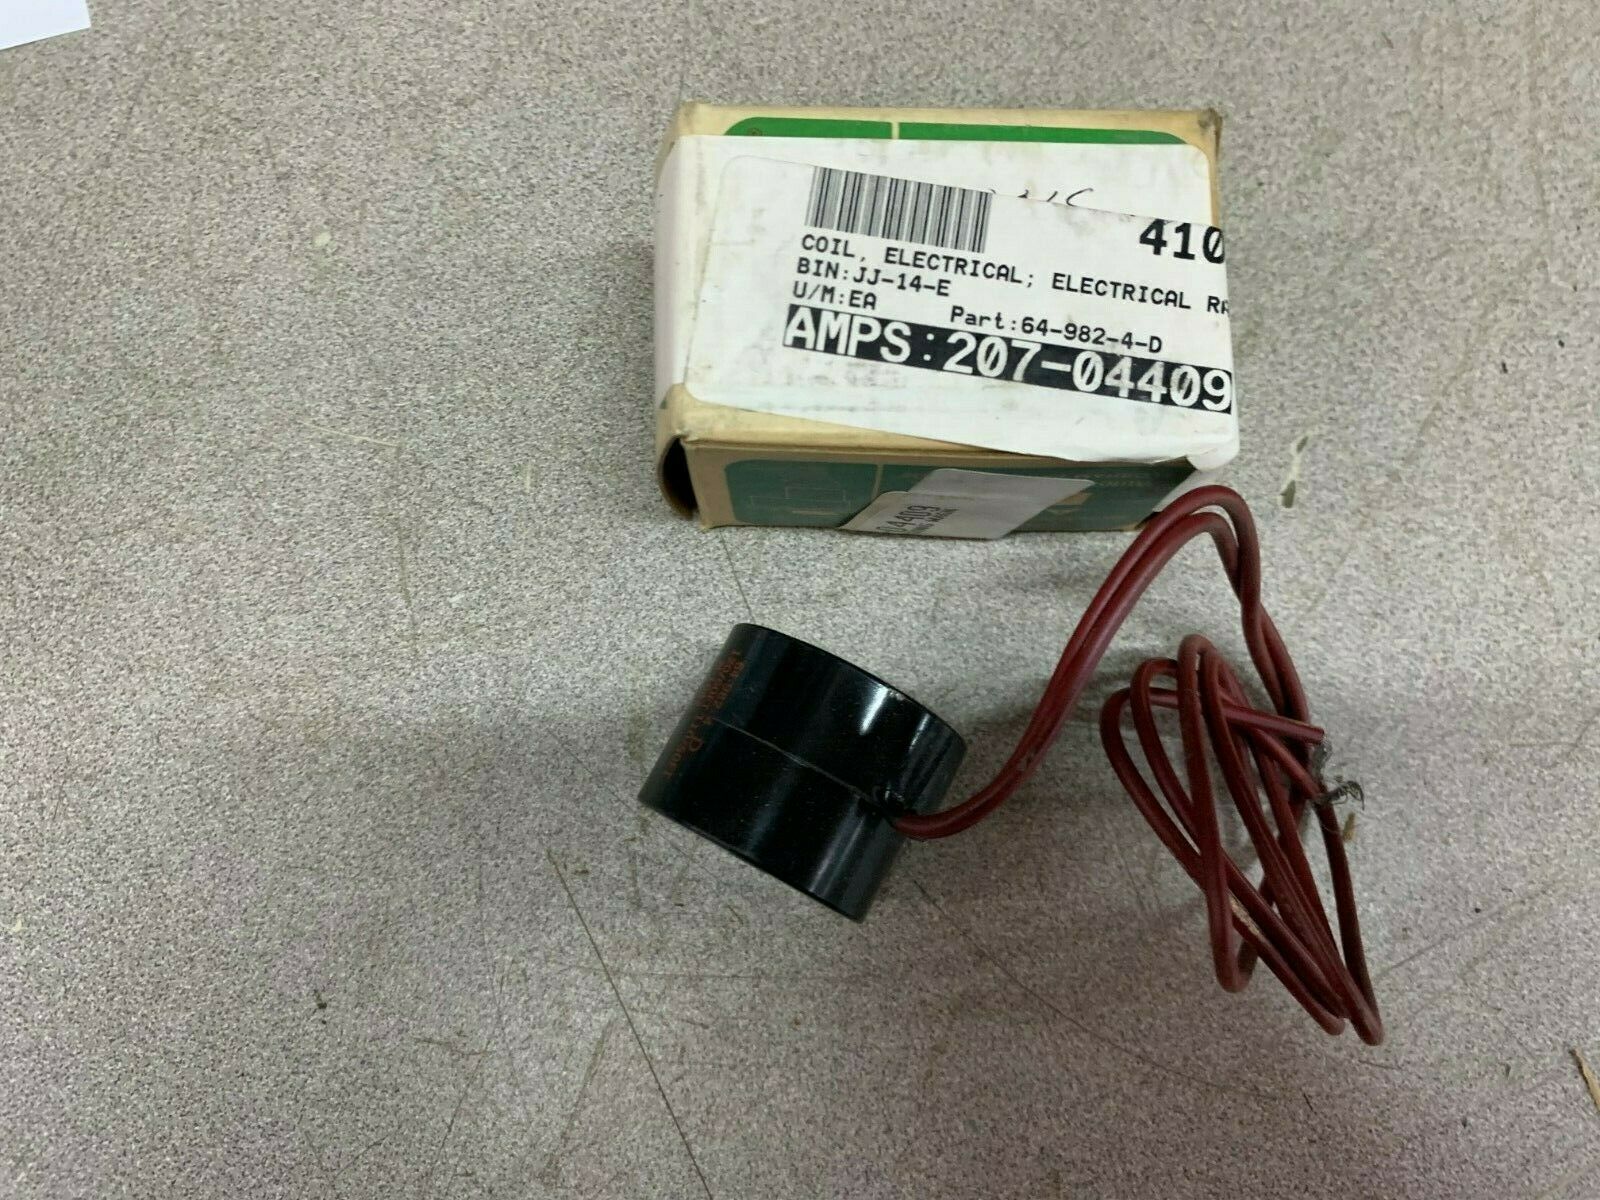 LOT OF 2 NEW IN BOX ASCO COILS 64-982-D